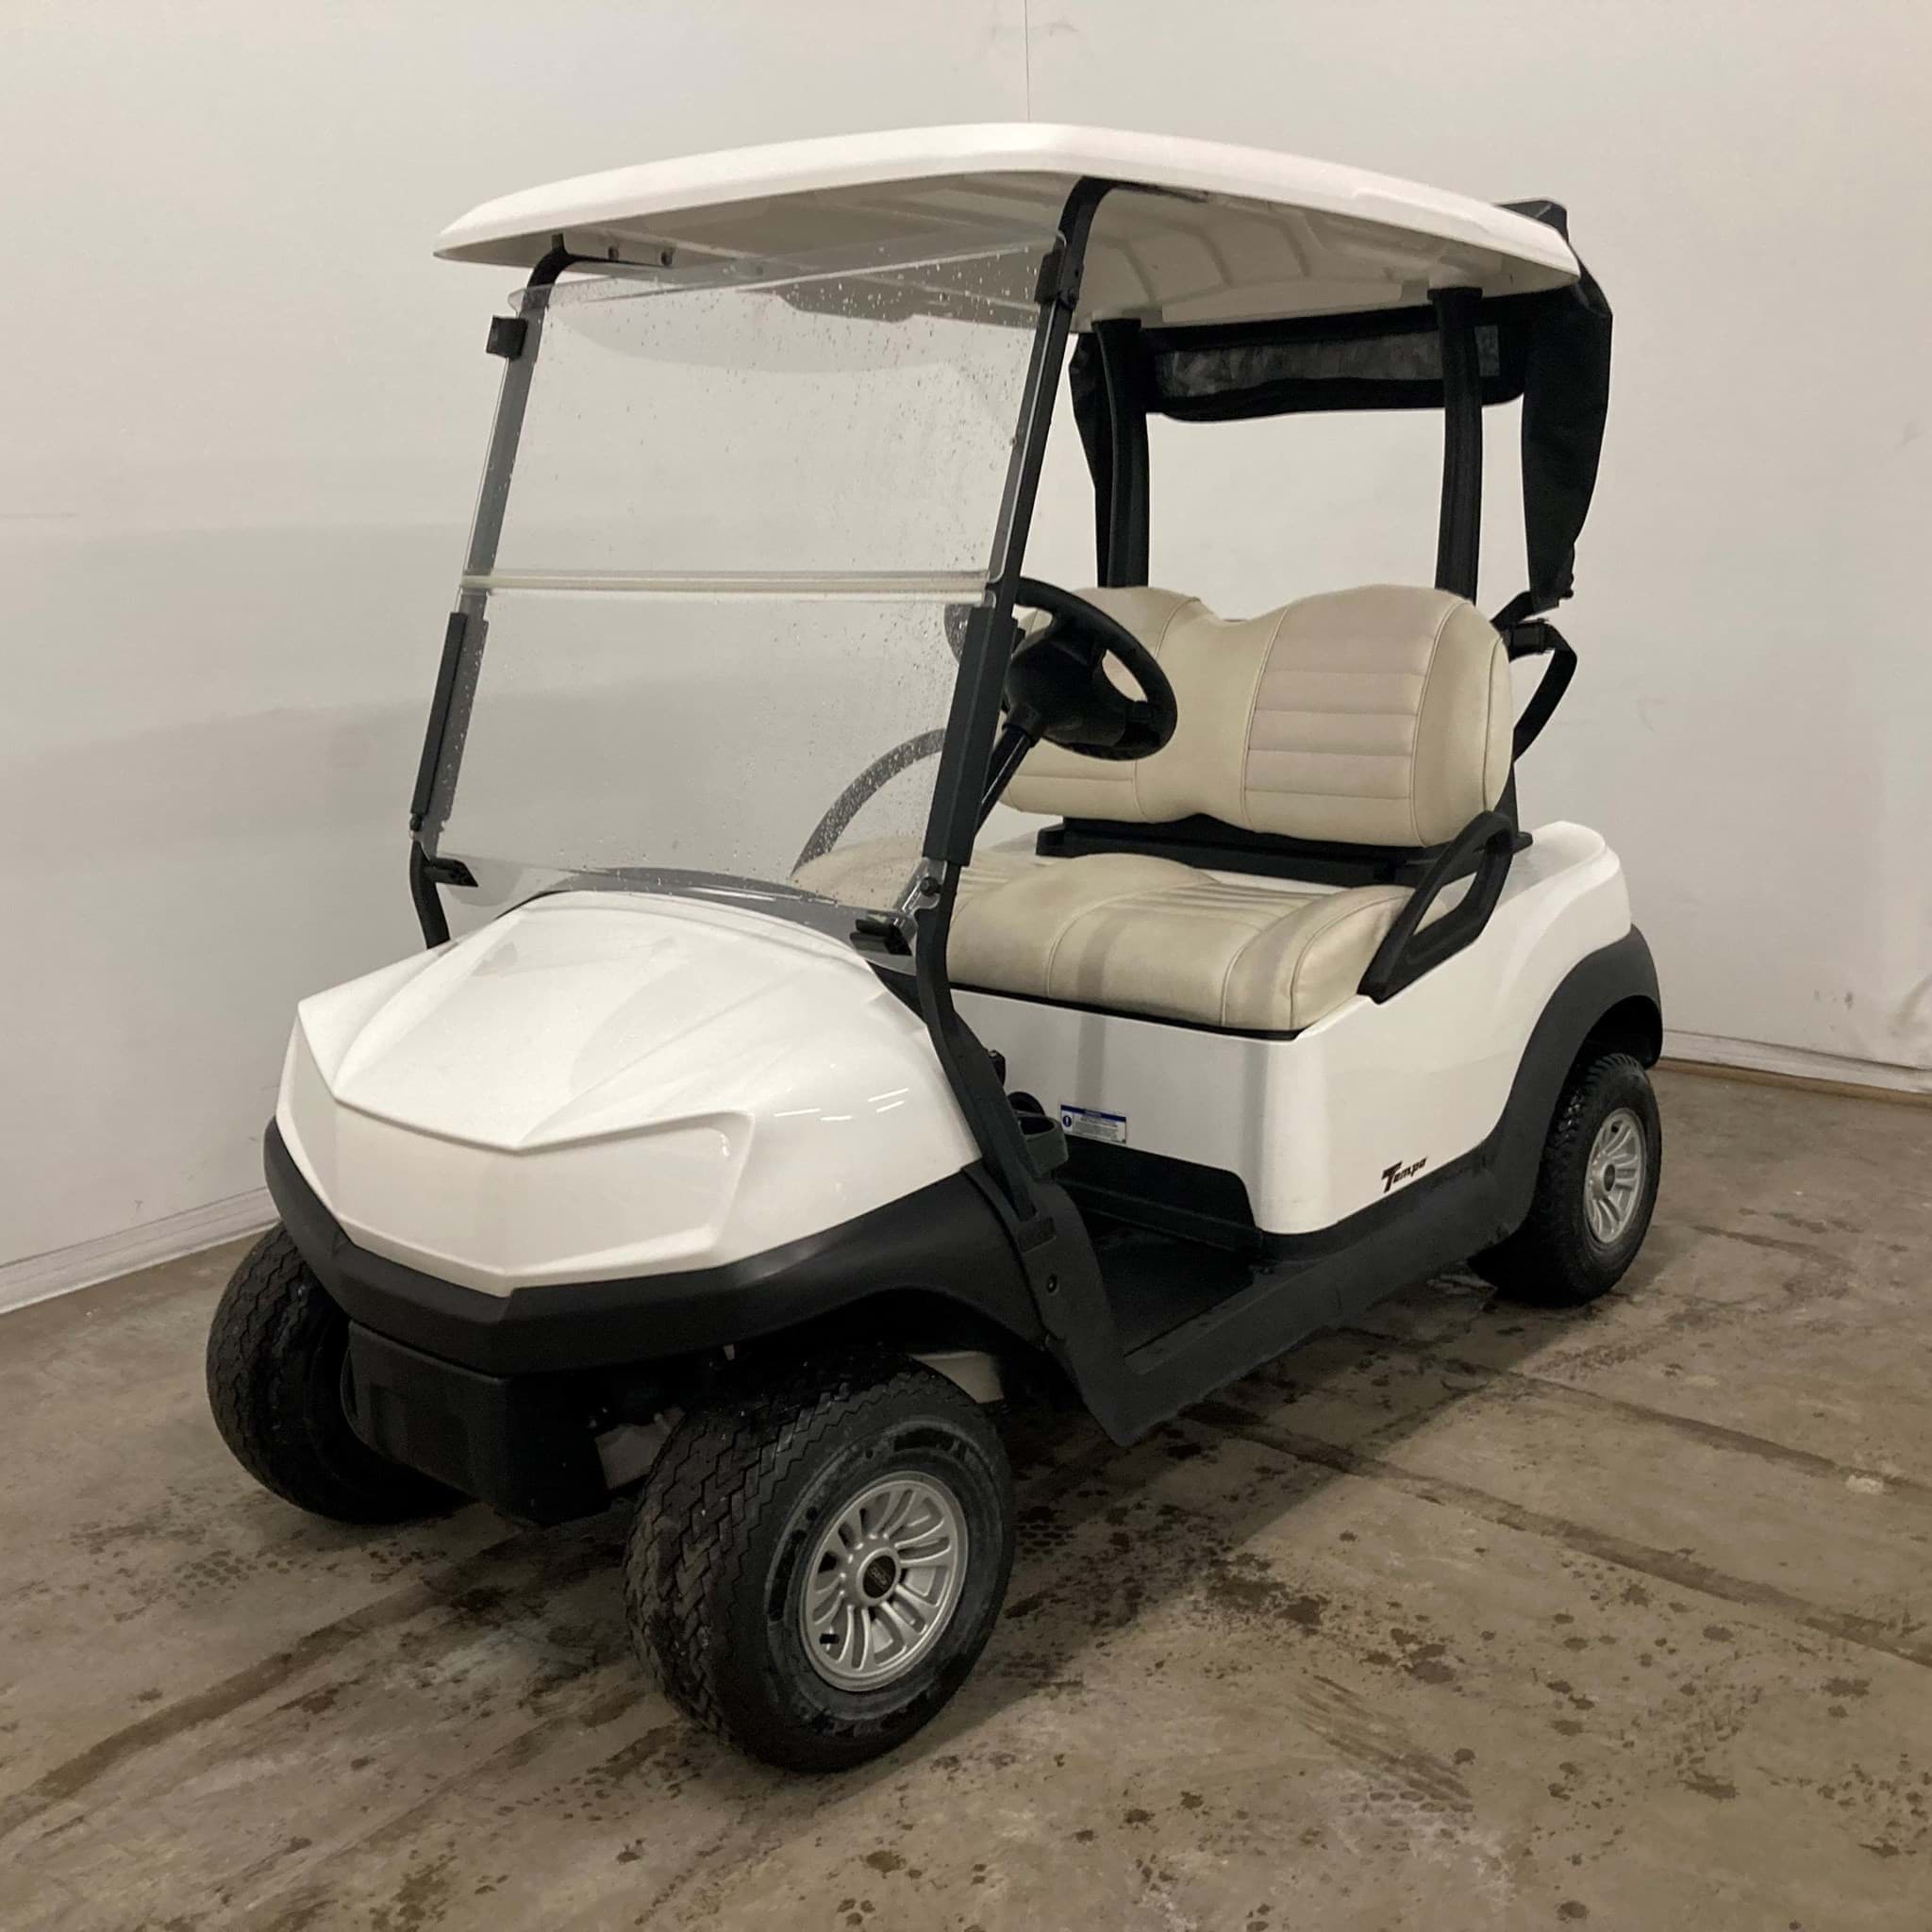 Picture of Trade - 2020 - Electric - Club Car - Tempo - 2 seater - White